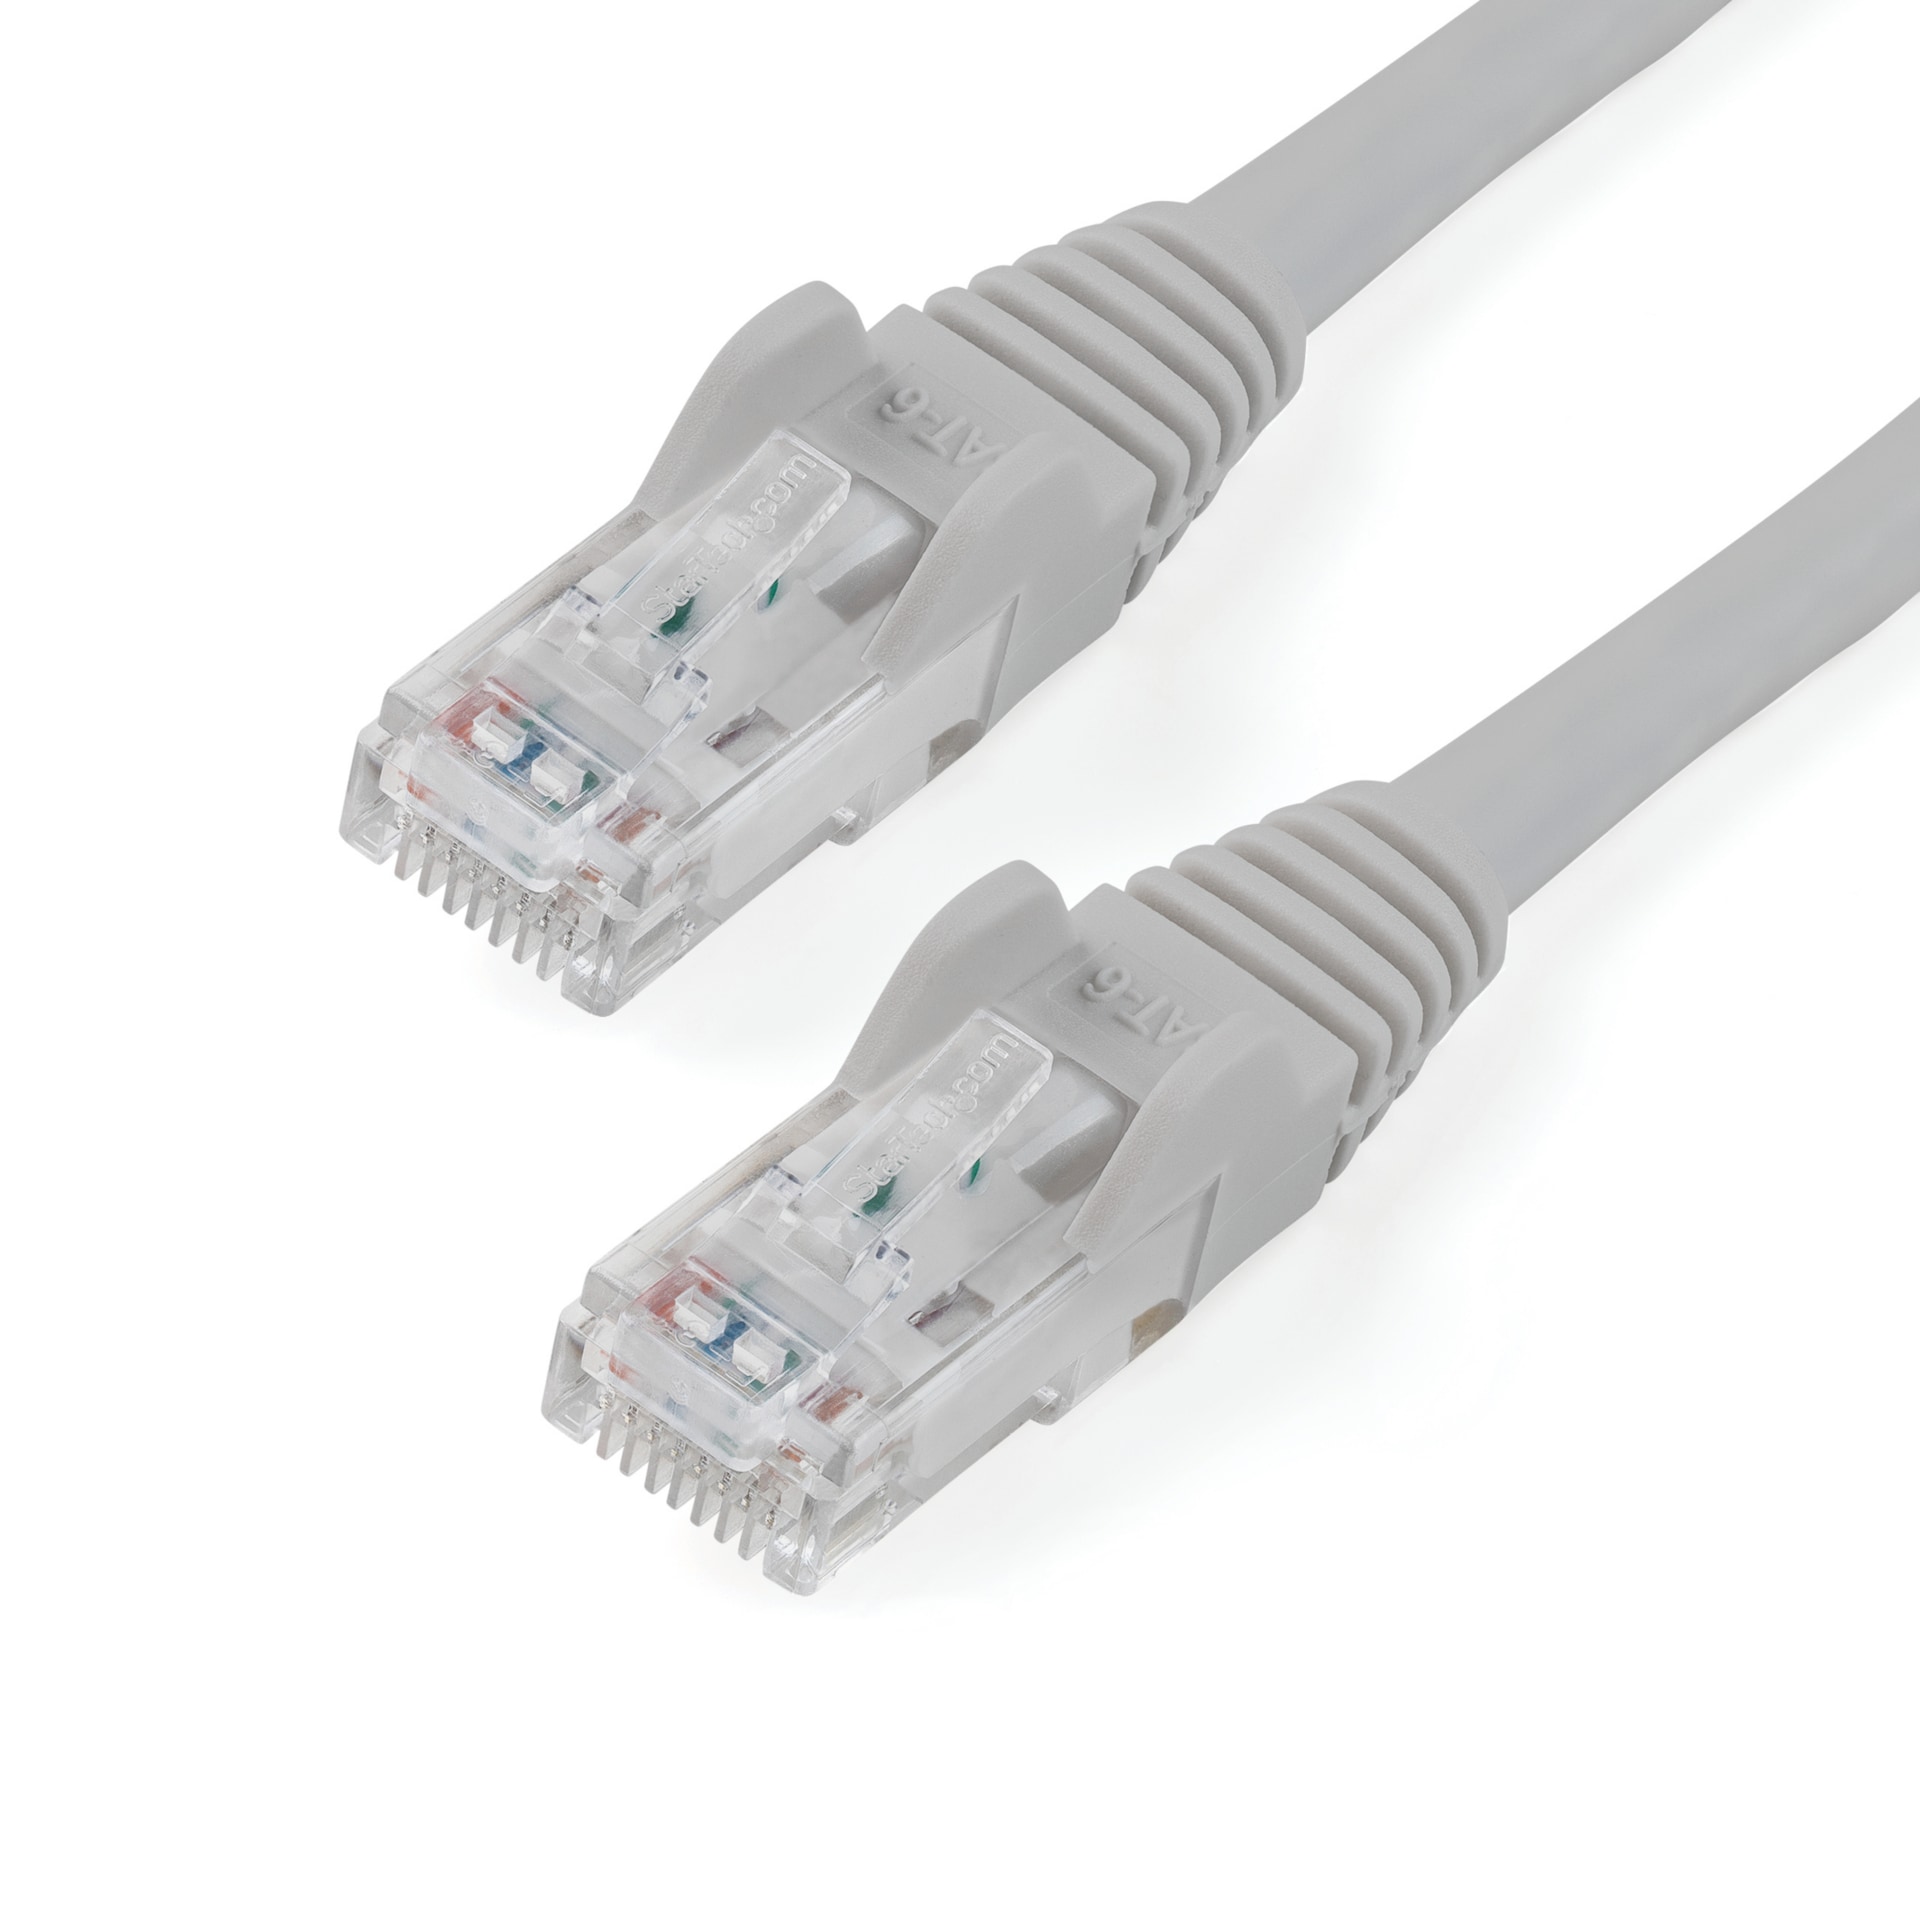 StarTech.com 10ft CAT6 Ethernet Cable Gray Snagless UTP CAT 6 Gigabit Cord/Wire 100W PoE 650MHz